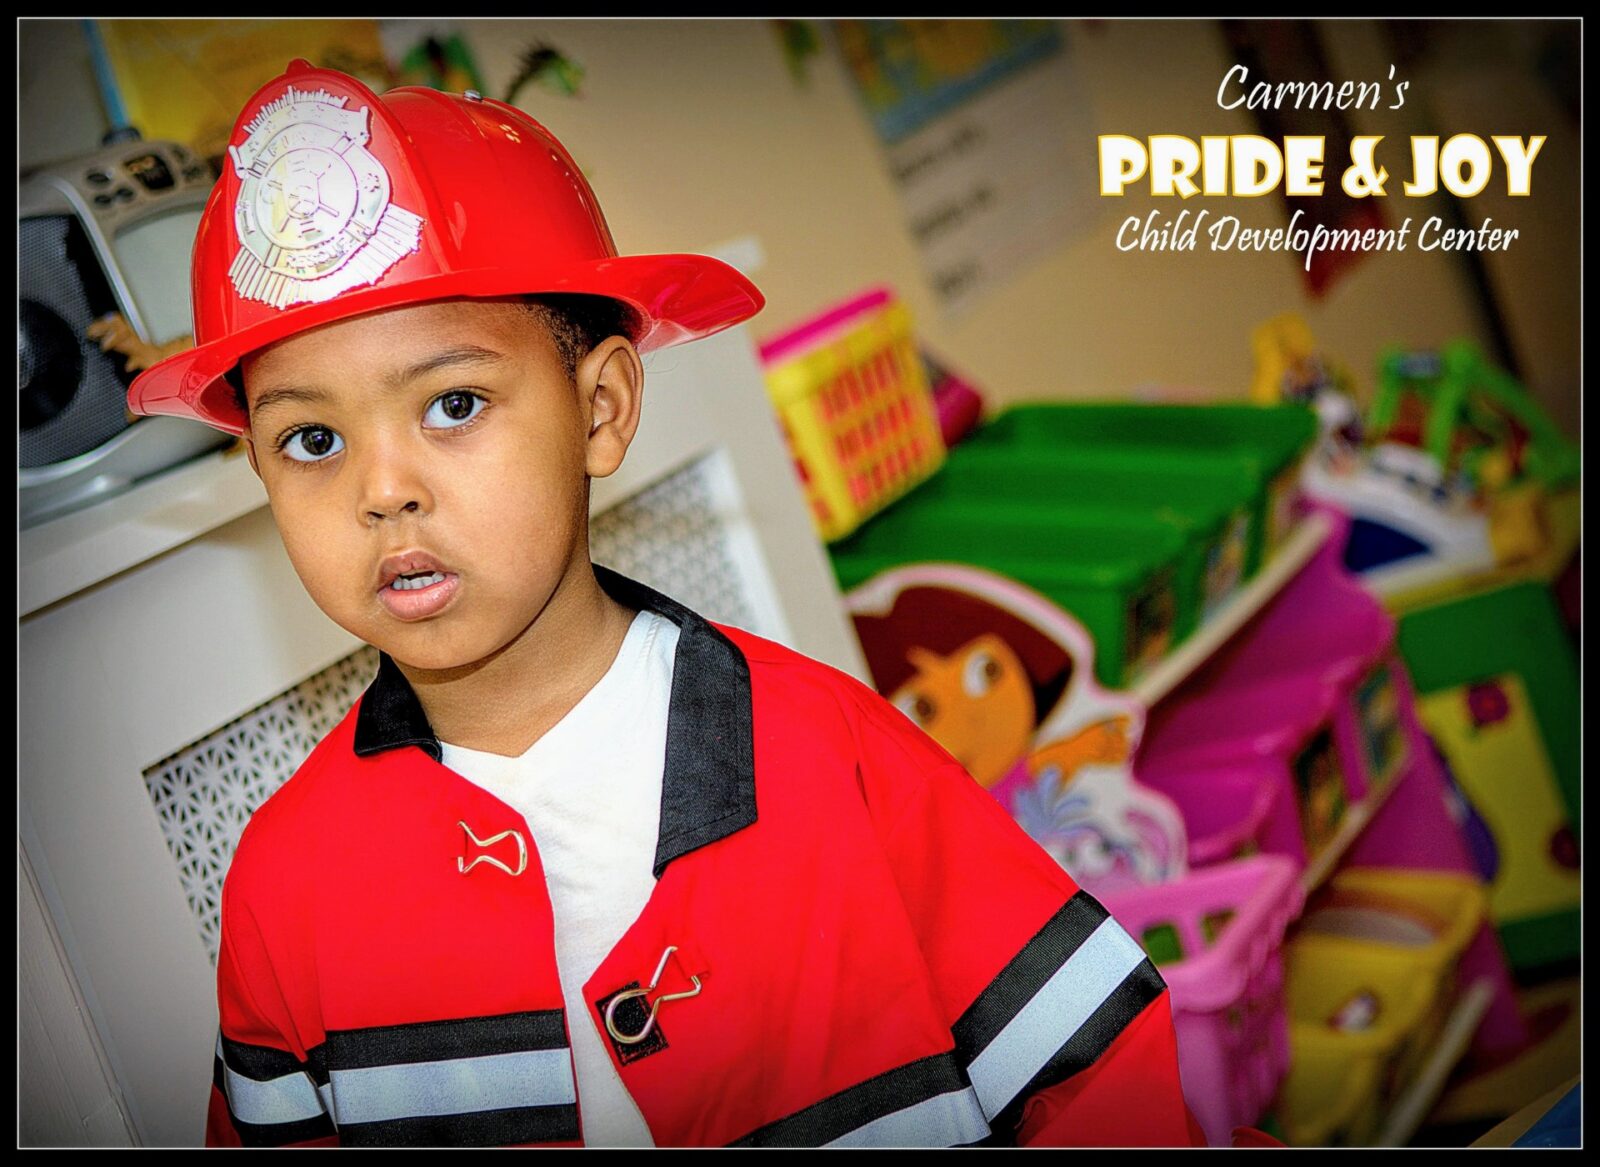 A young boy in a firefighter costume.